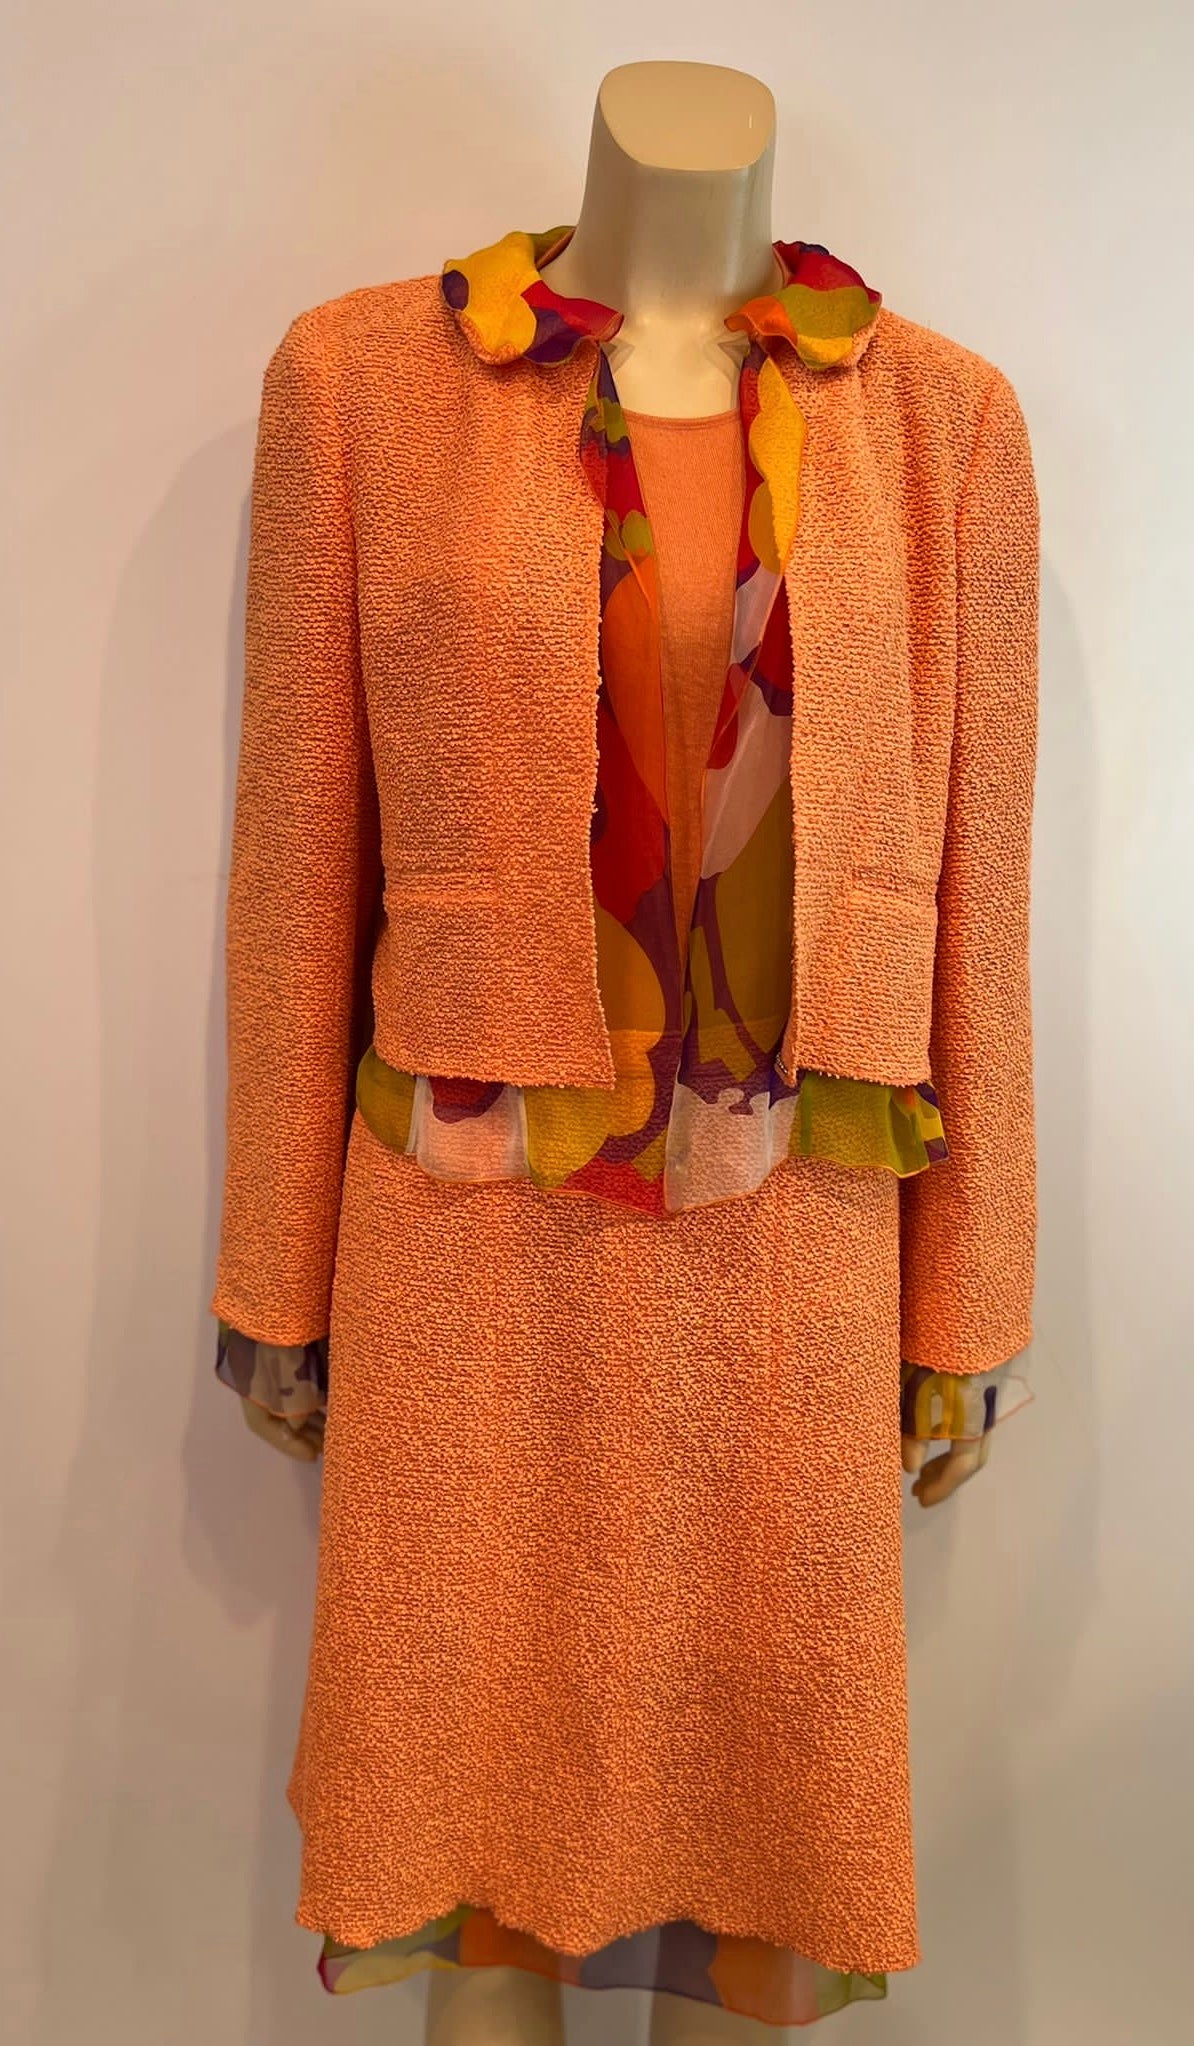 CHANEL 00A Excellent Vintage Gold Beige Wool Jacket Top with Scarf 36 38  US4 6